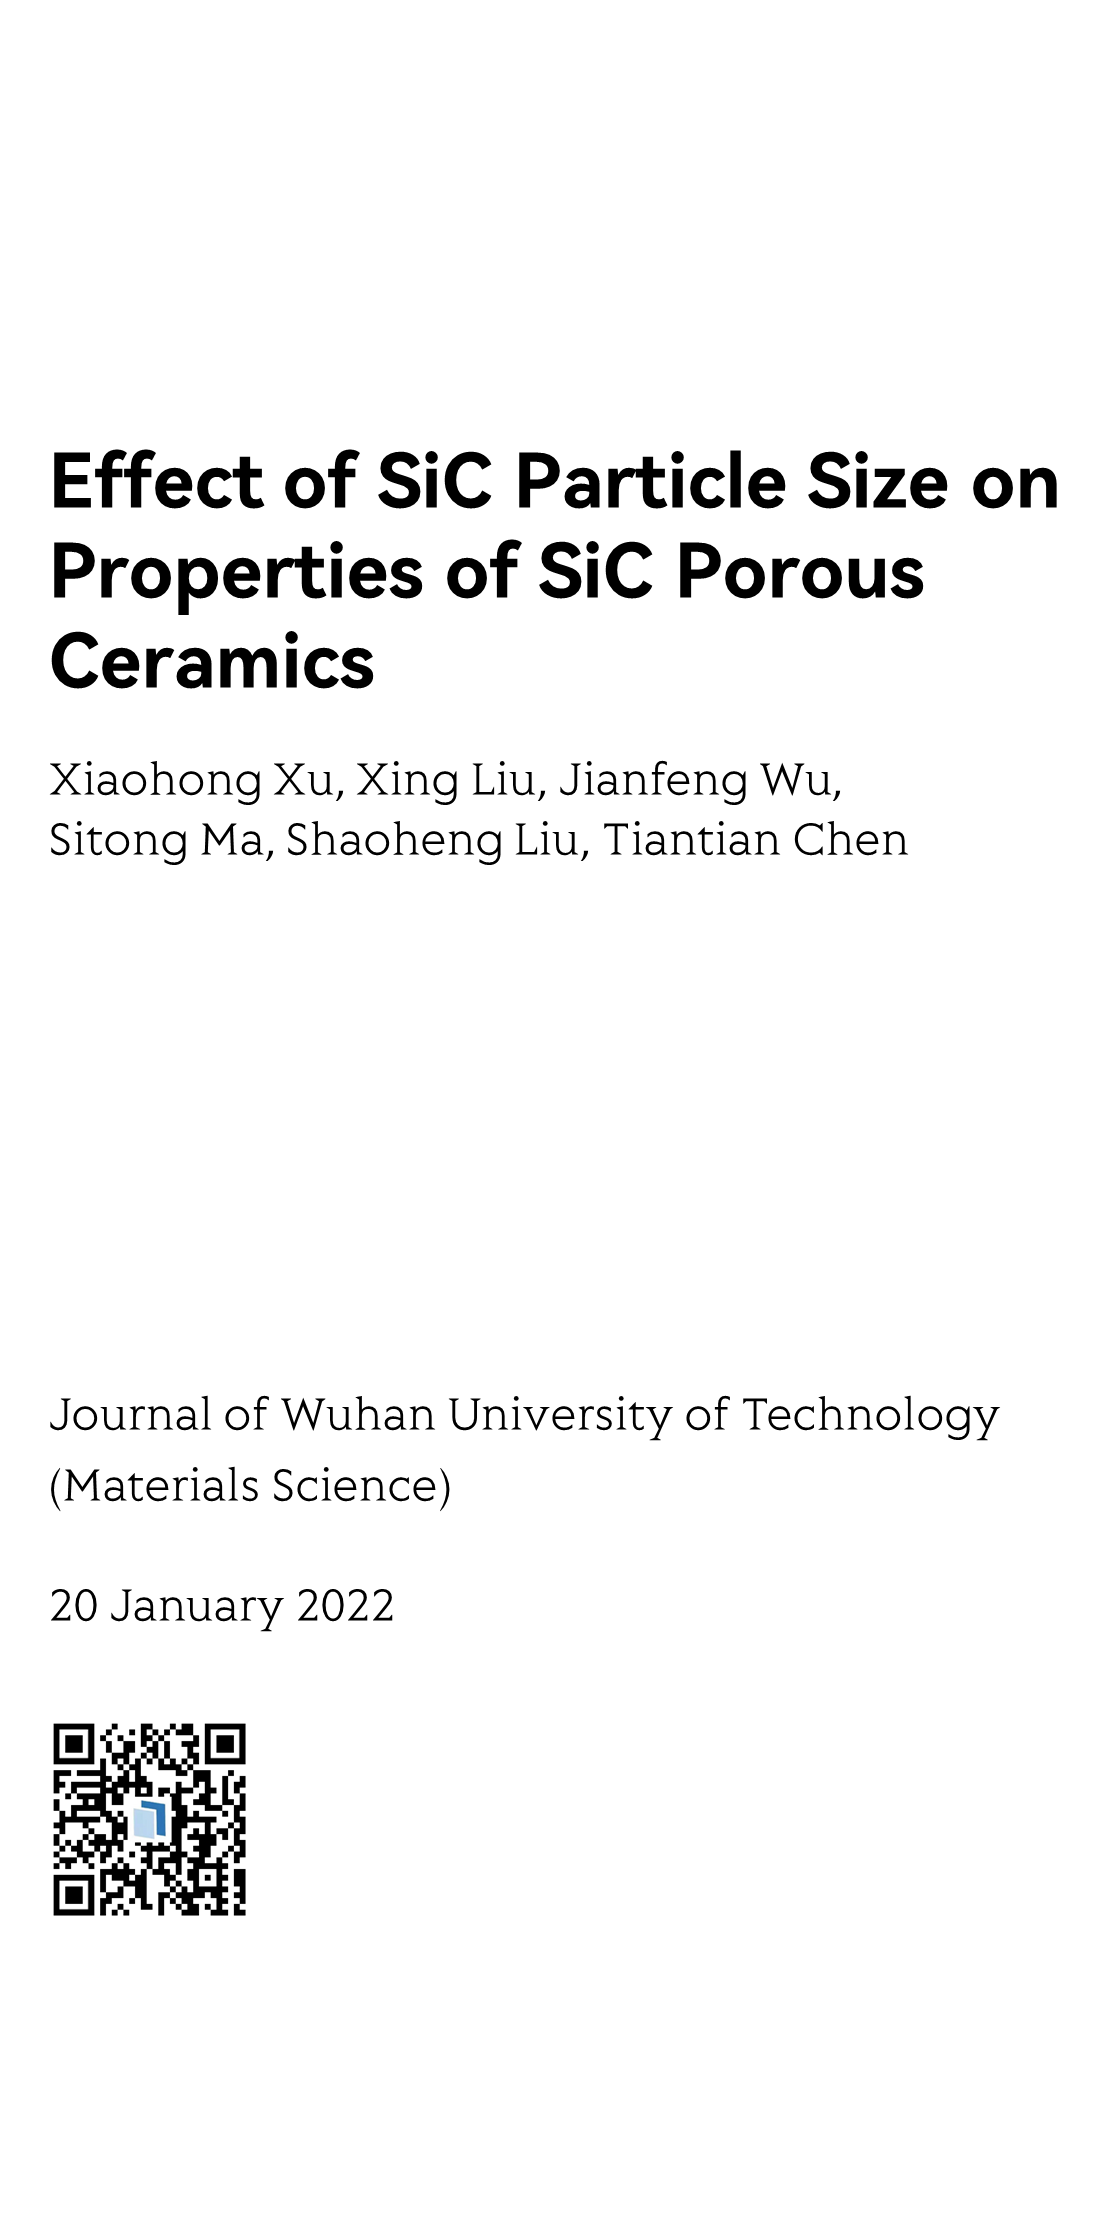 Journal of Wuhan University of Technology (Materials Science)_1